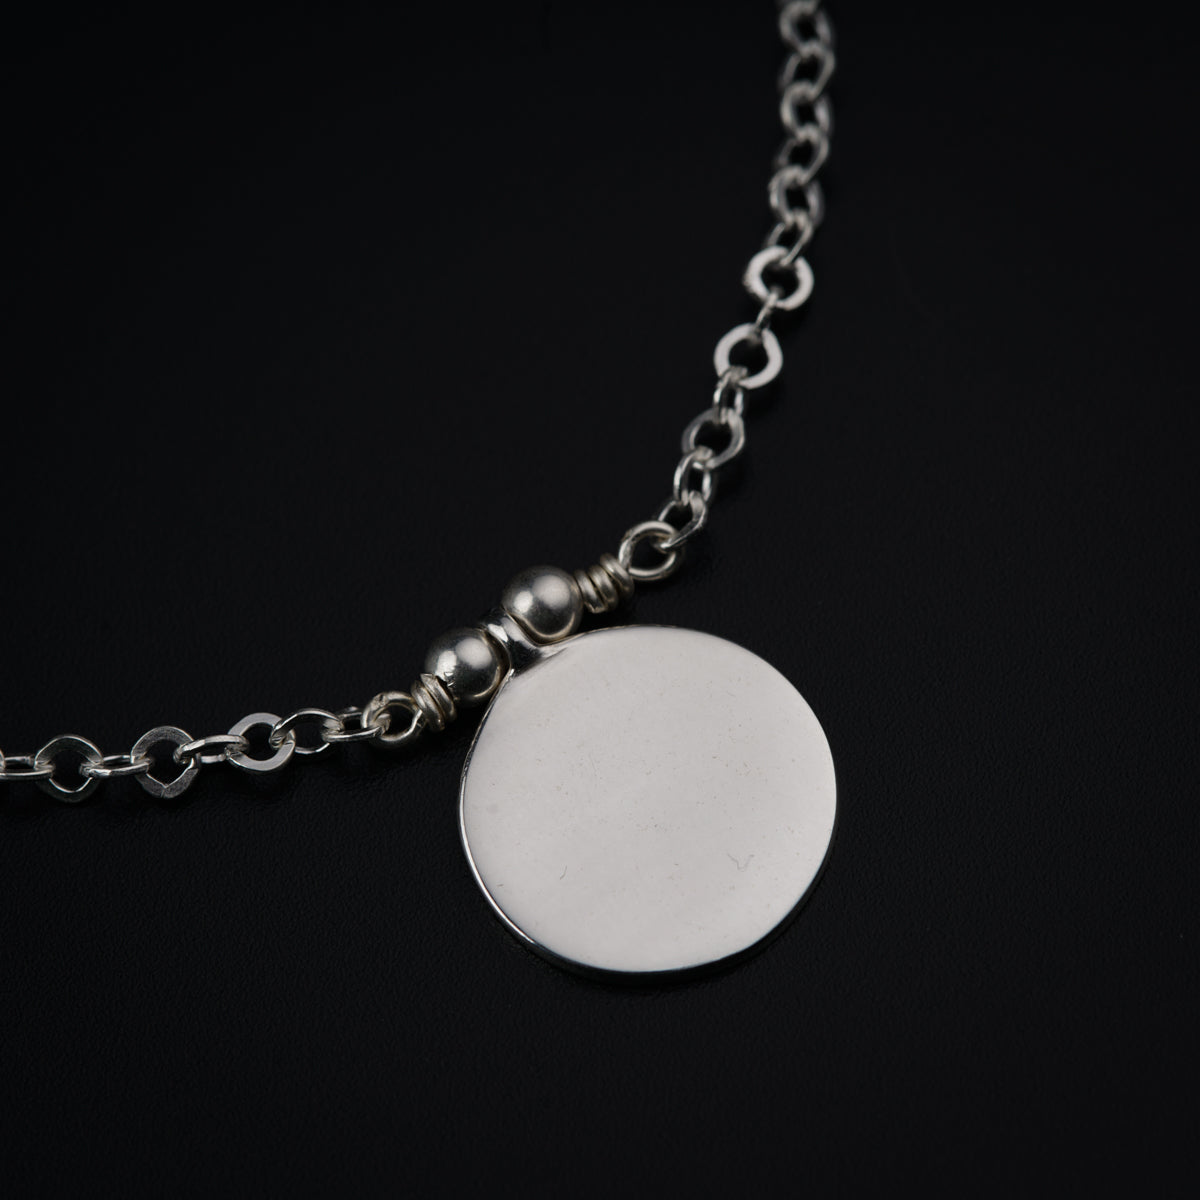 Single Coin Necklace: Small